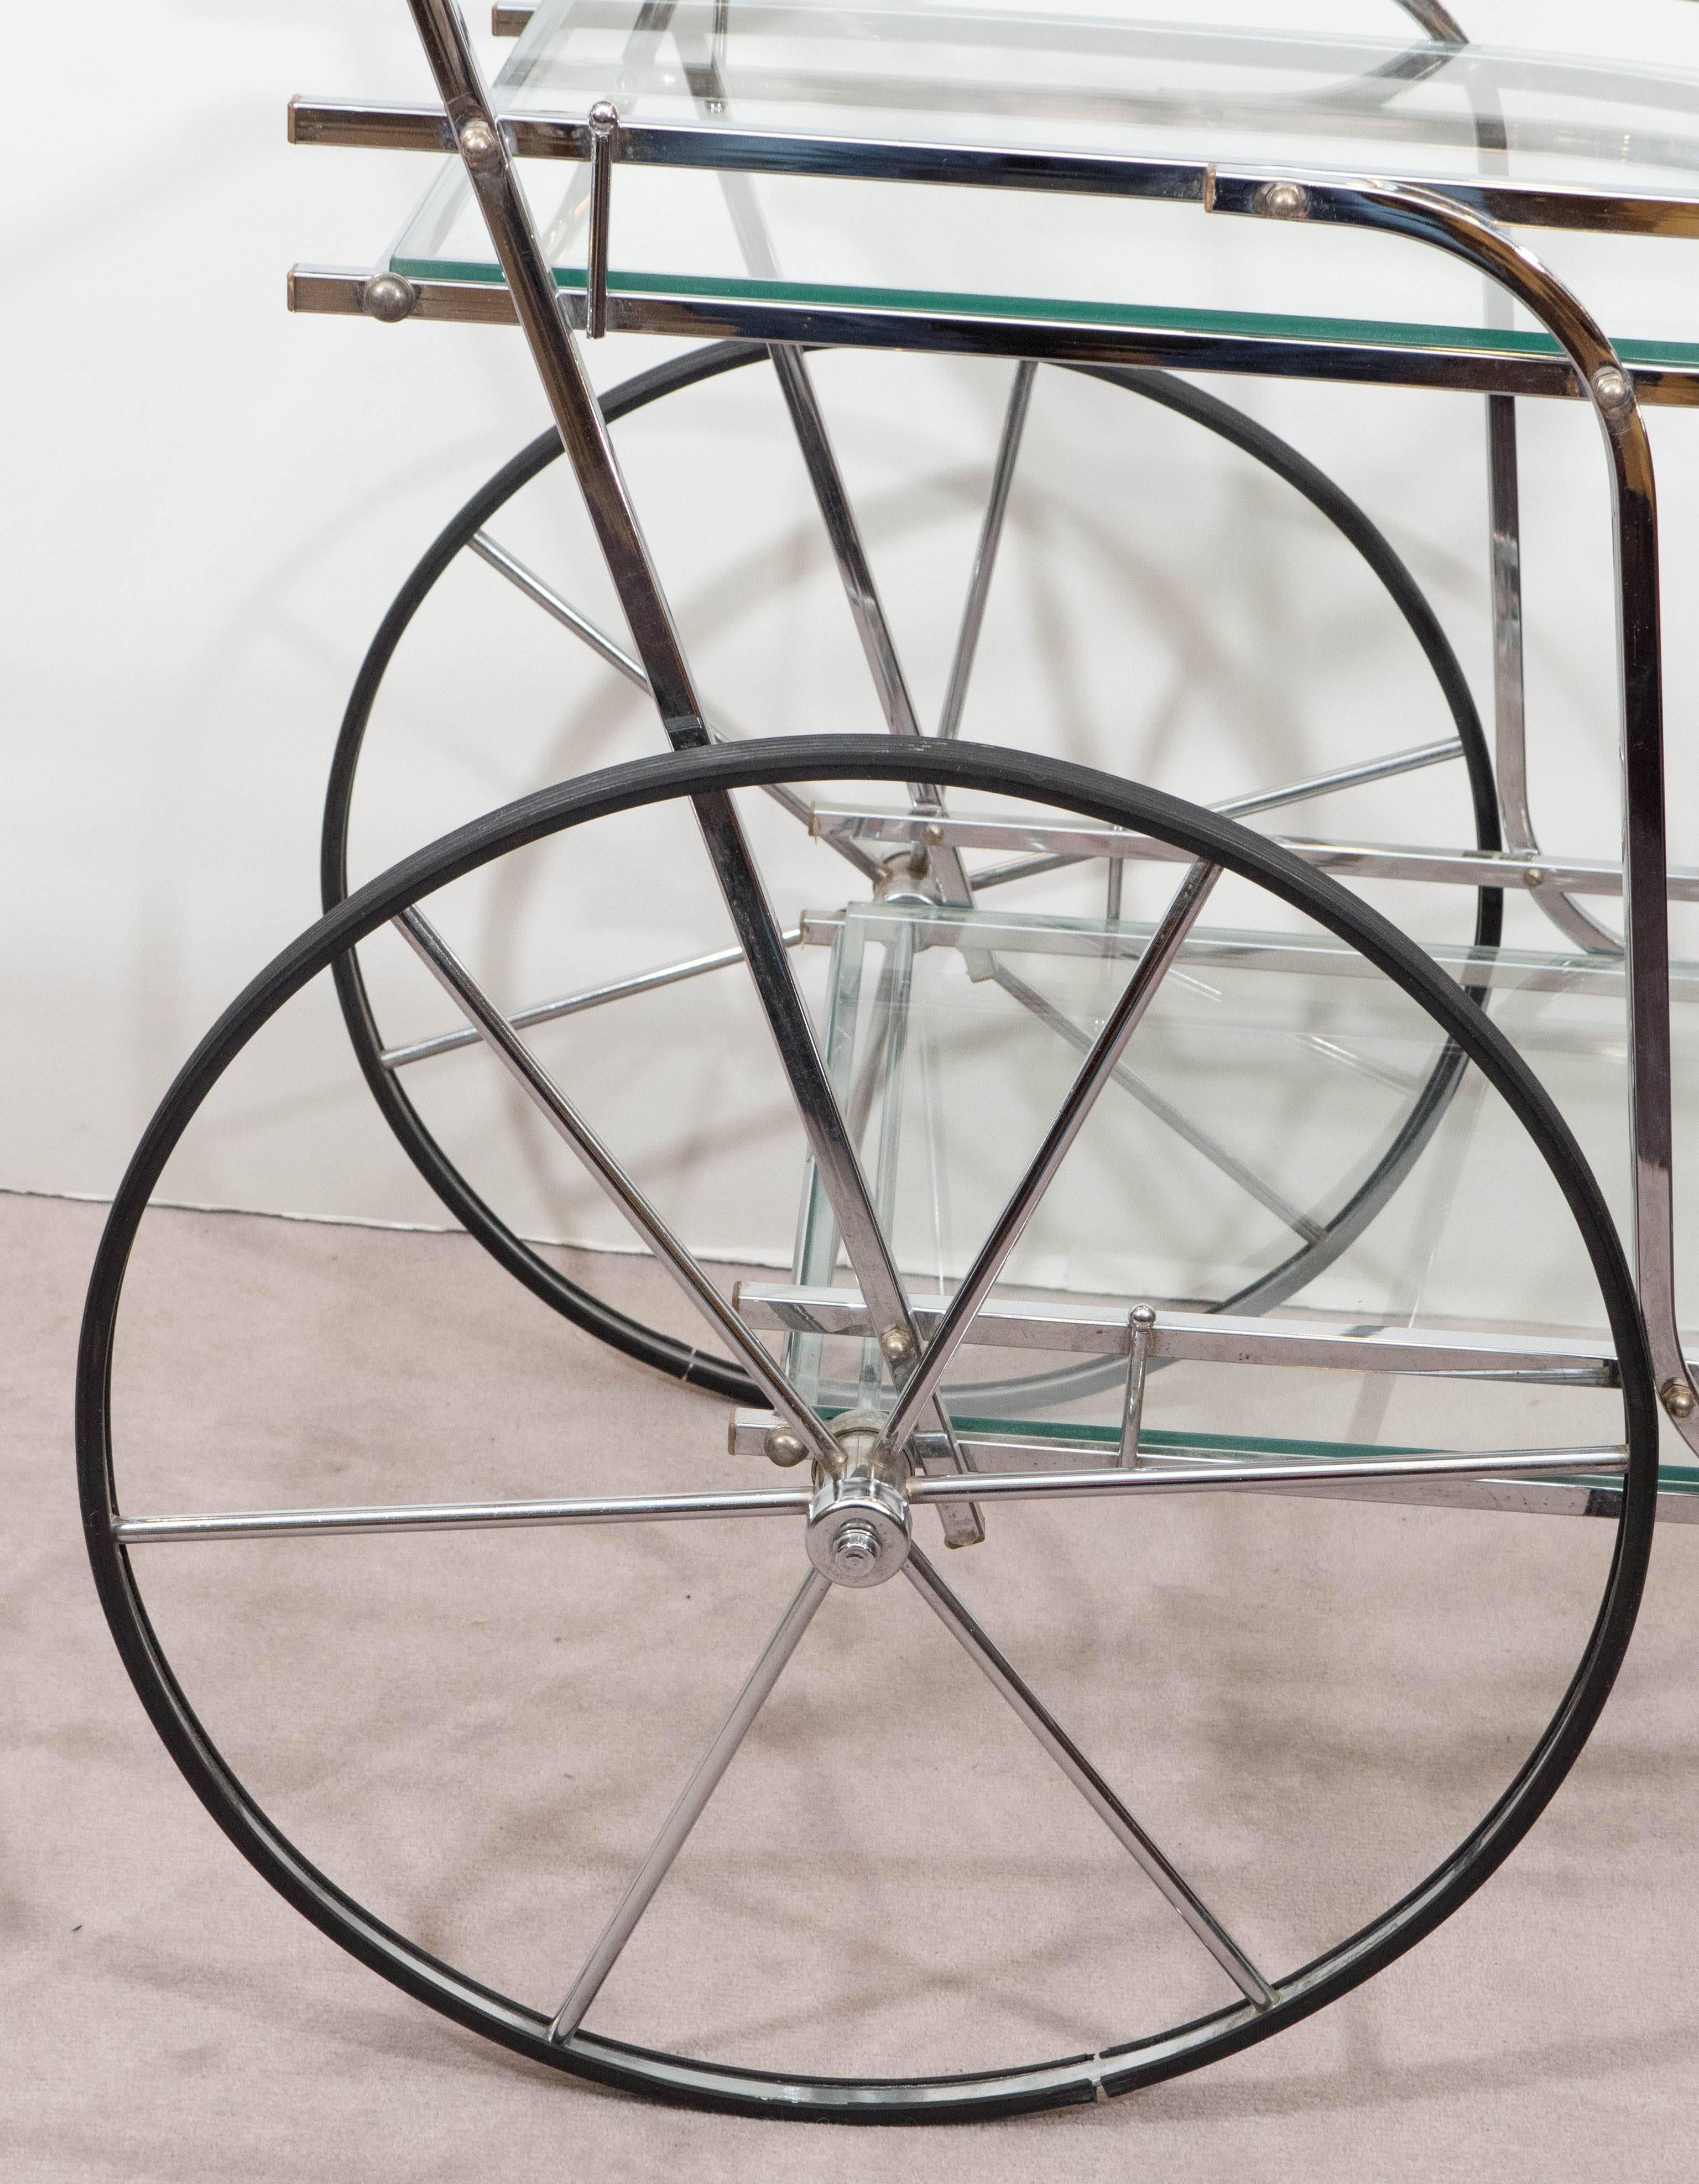 An exquisite two-tier bar cart in polished chrome, produced, circa 1960s with curved rope motif push handle, including glass tops with galleries, flanked by large spoke wheels and a front caster wheel. Very good condition, consistent with age; glass